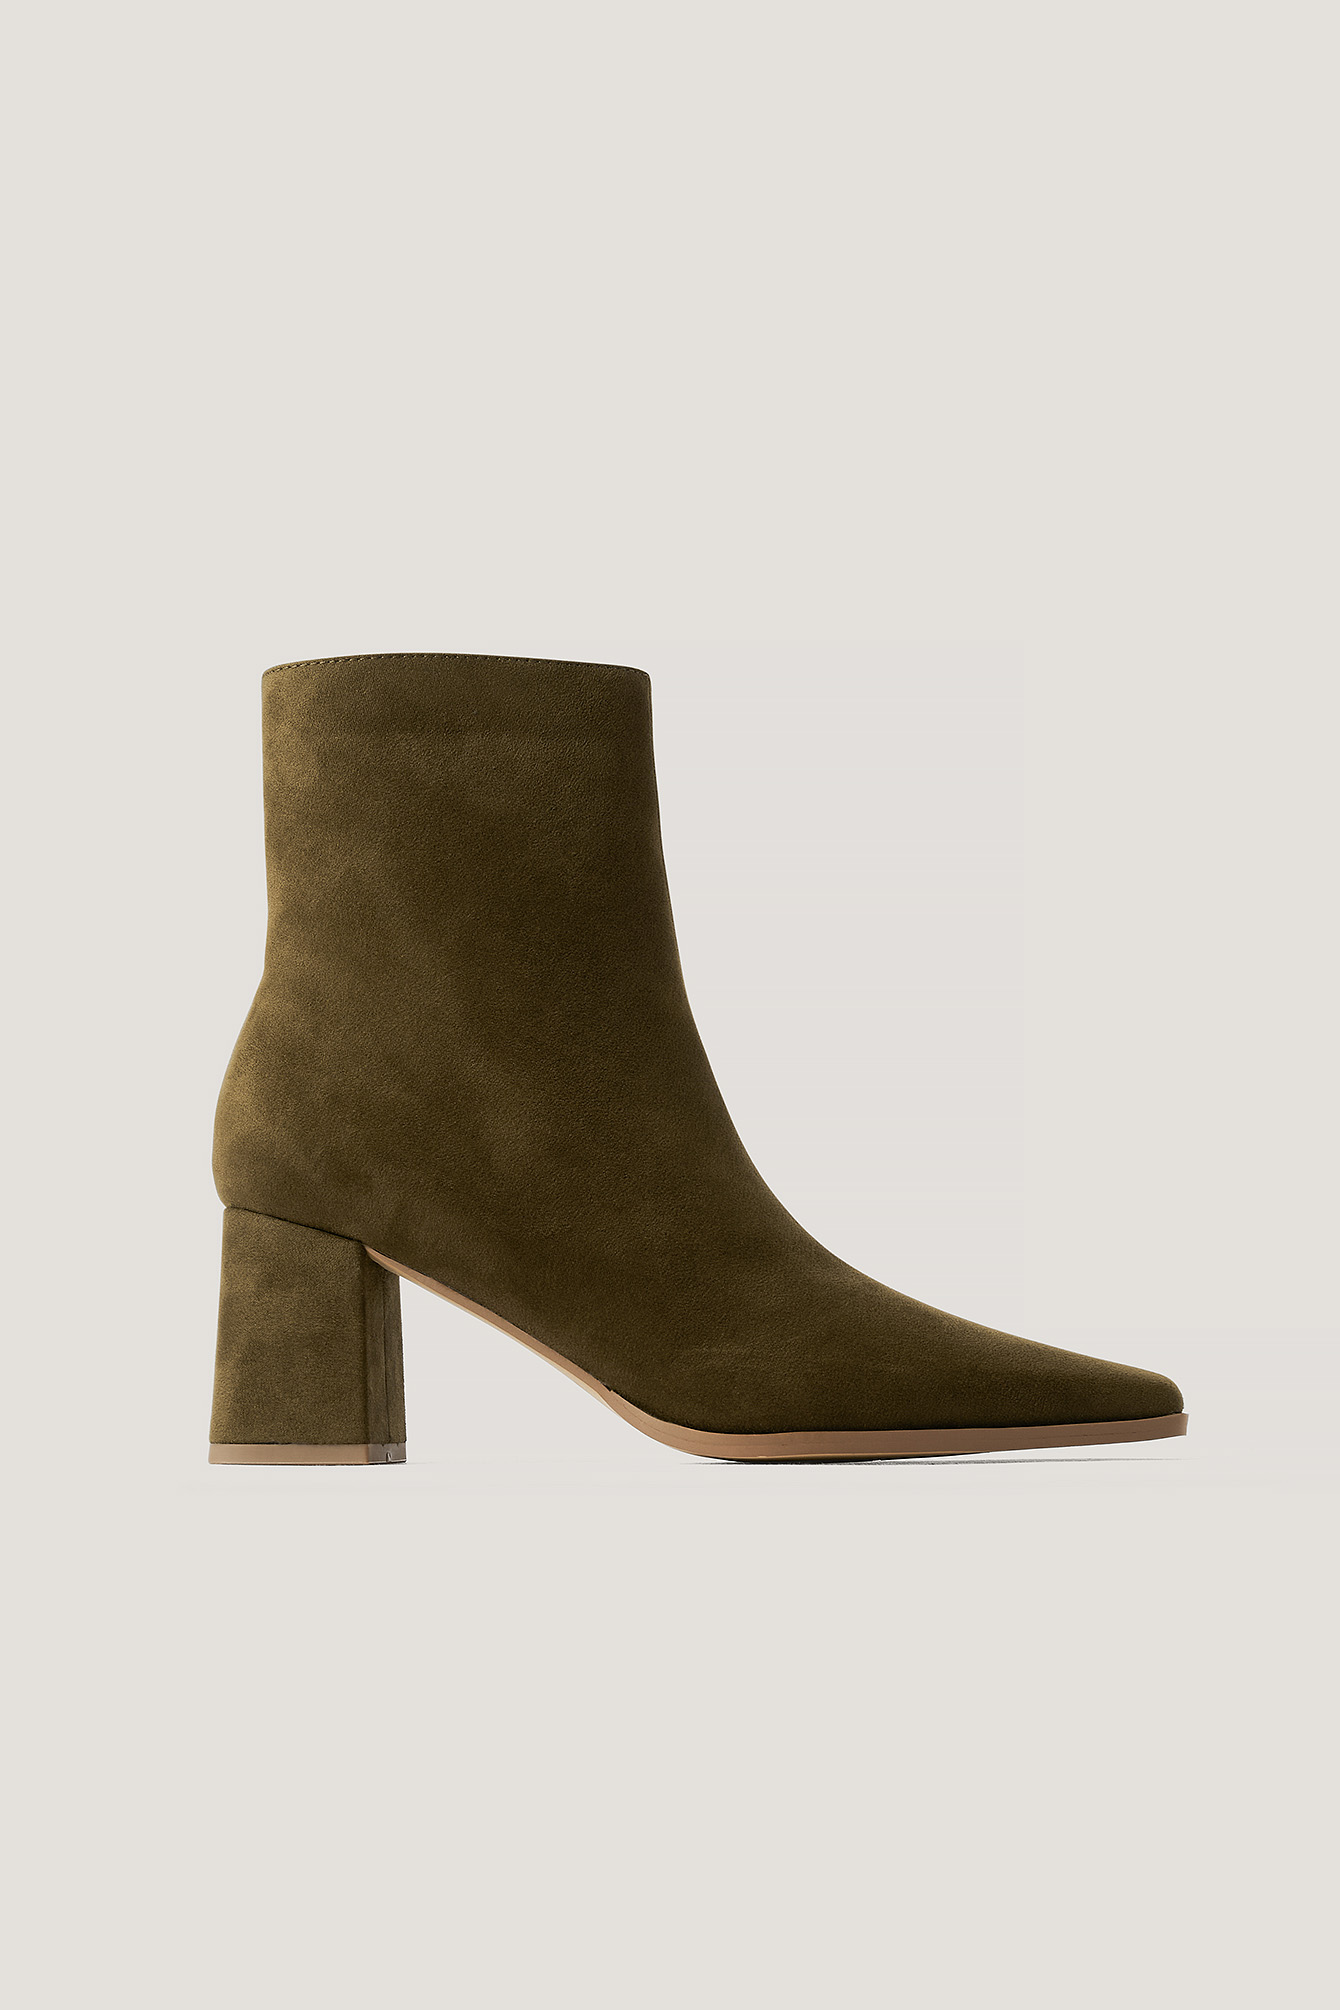 Moss Faux Suede Slim Toe Boots